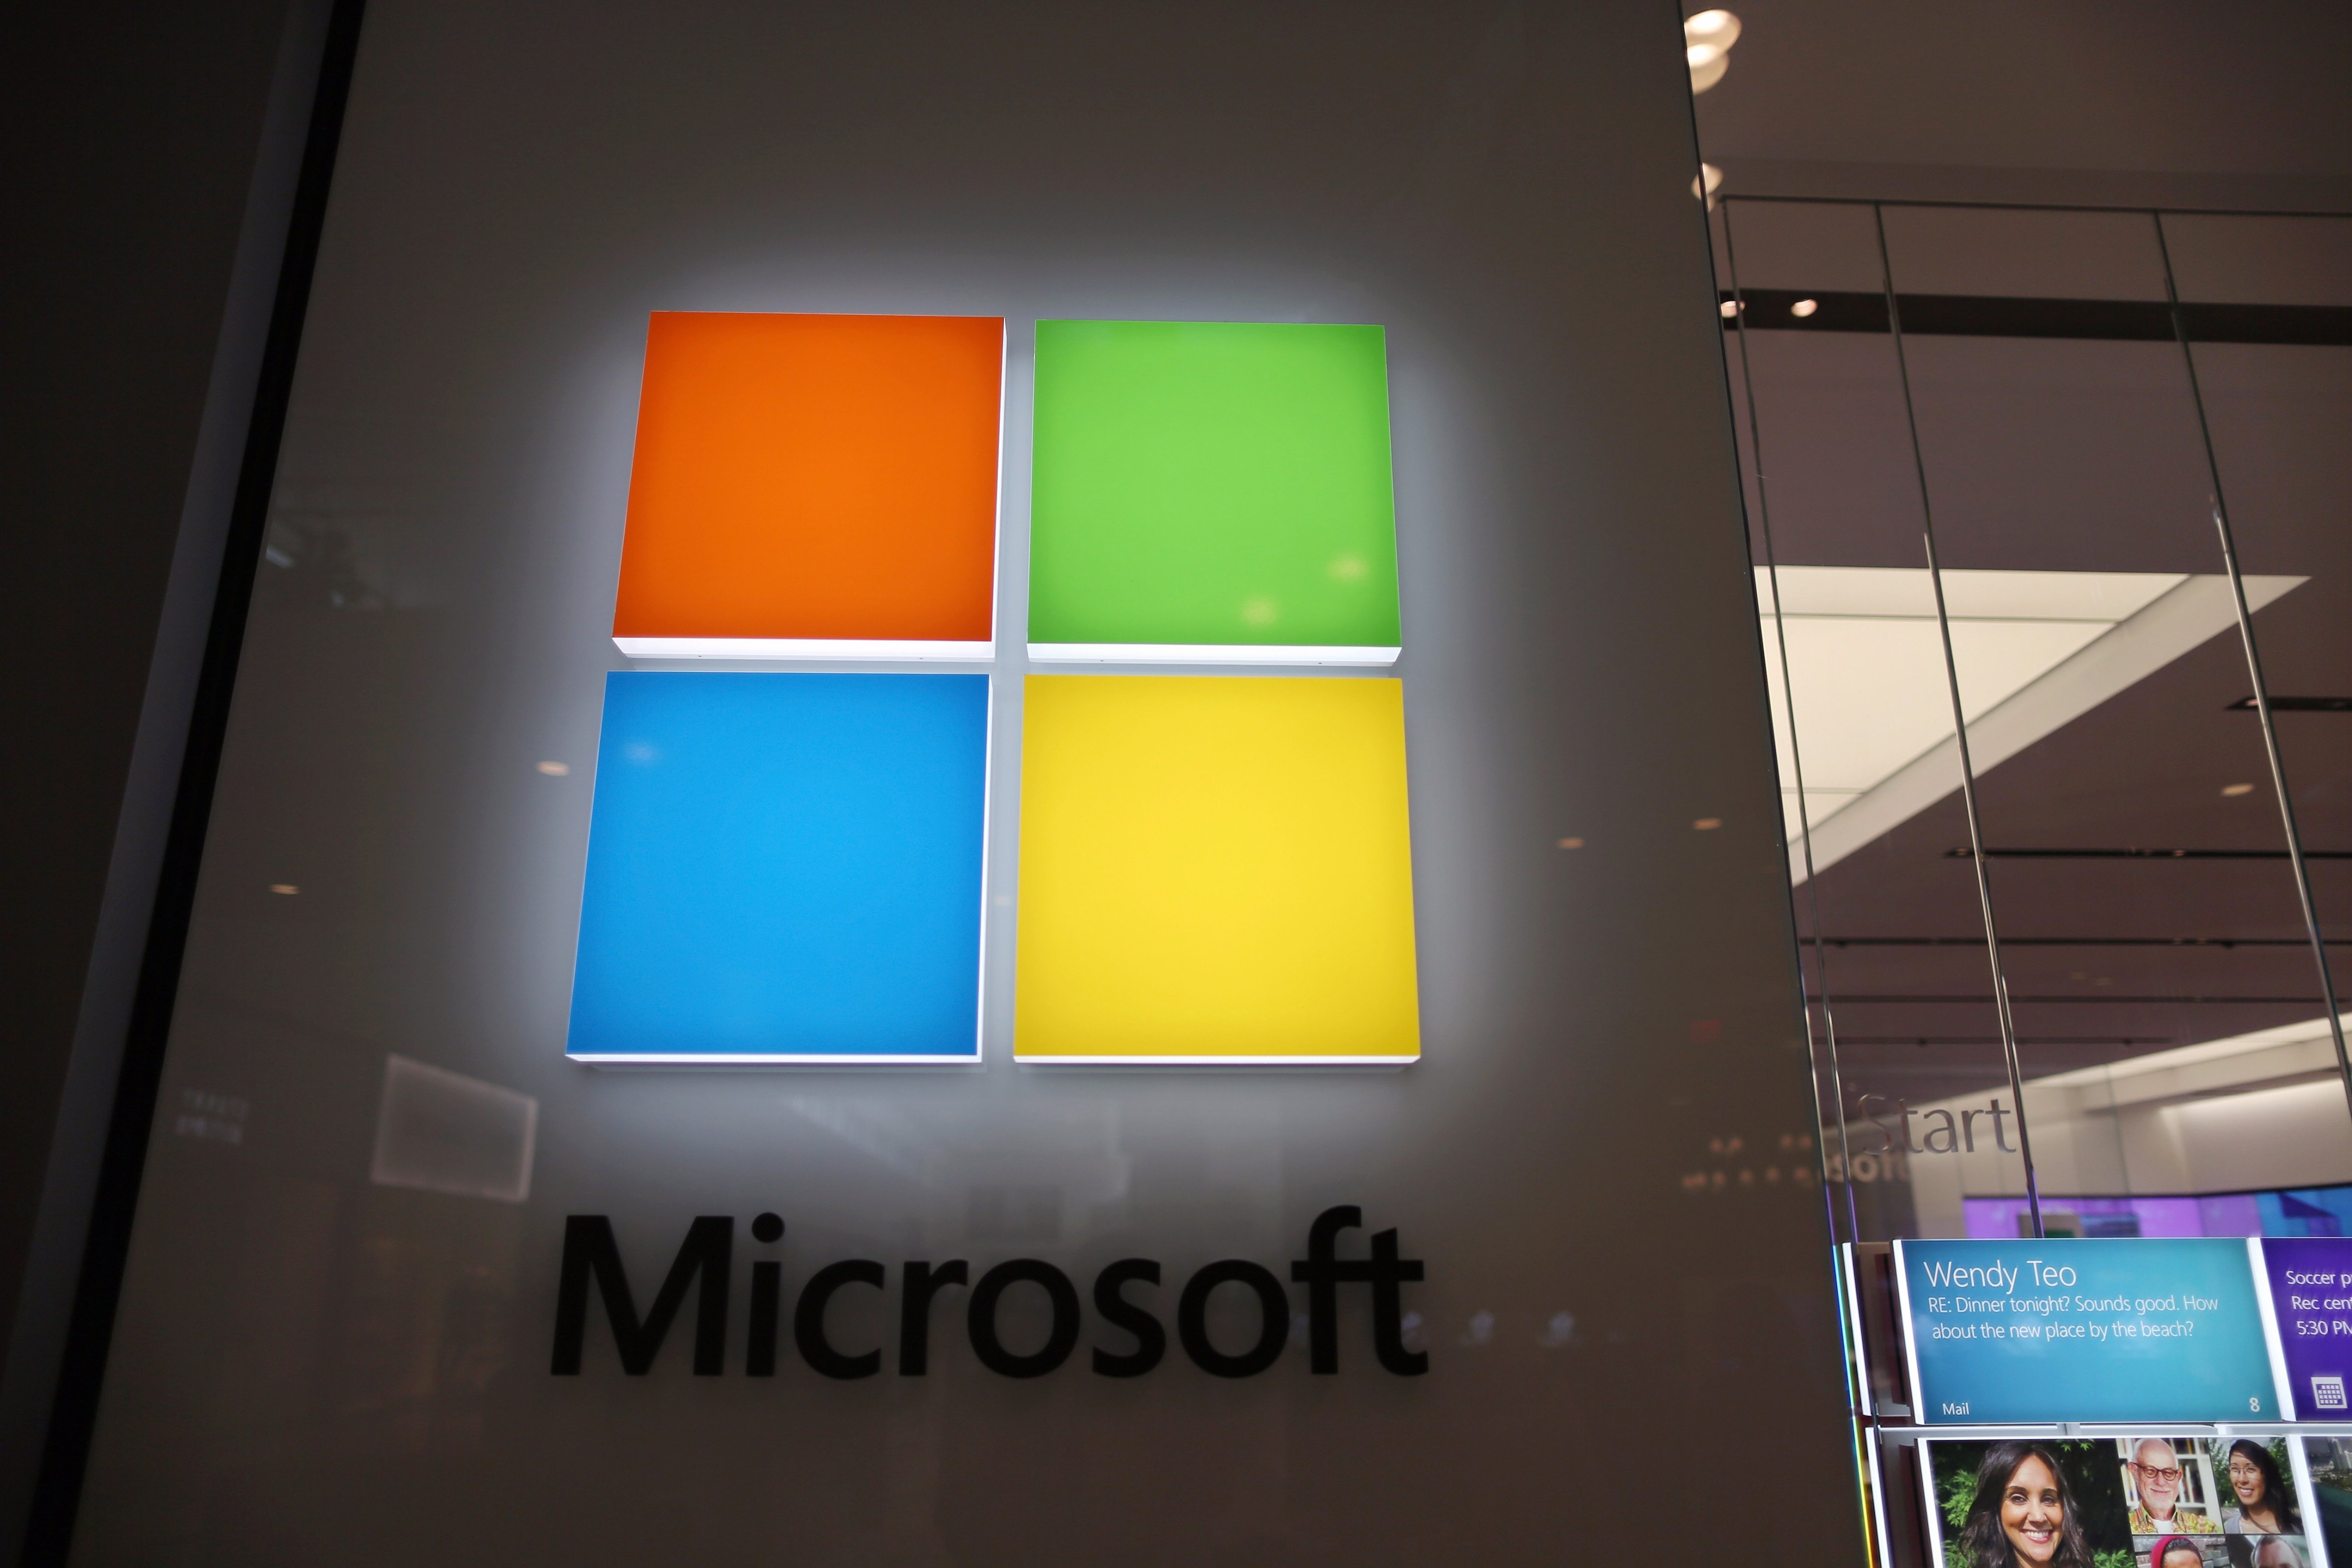 A sign is seen on the wall outside of a Microsoft store in the Dadeland Mall. (Joe Raedle&mdash;Getty Images)